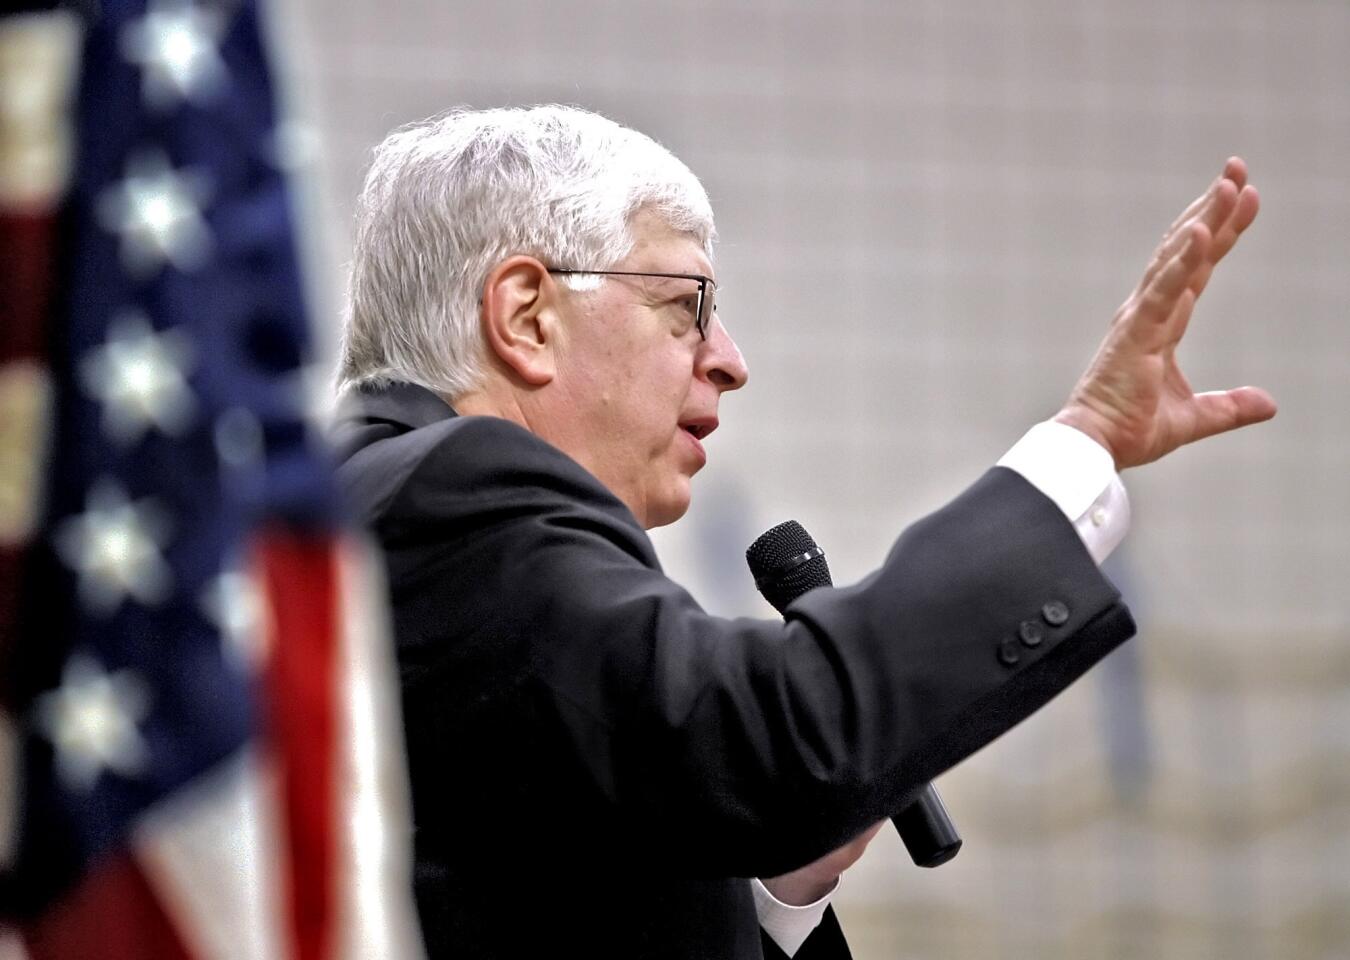 Radio talk show host Dennis Prager gave the keynote address "Was America Meant to be a Secular Nation?" at the YMCA of the Foothills 18th Community Prayer Breakfast held at the Crescenta-Canada Family YMCA in La Canada Flintridge on Thursday, November 3, 2011.